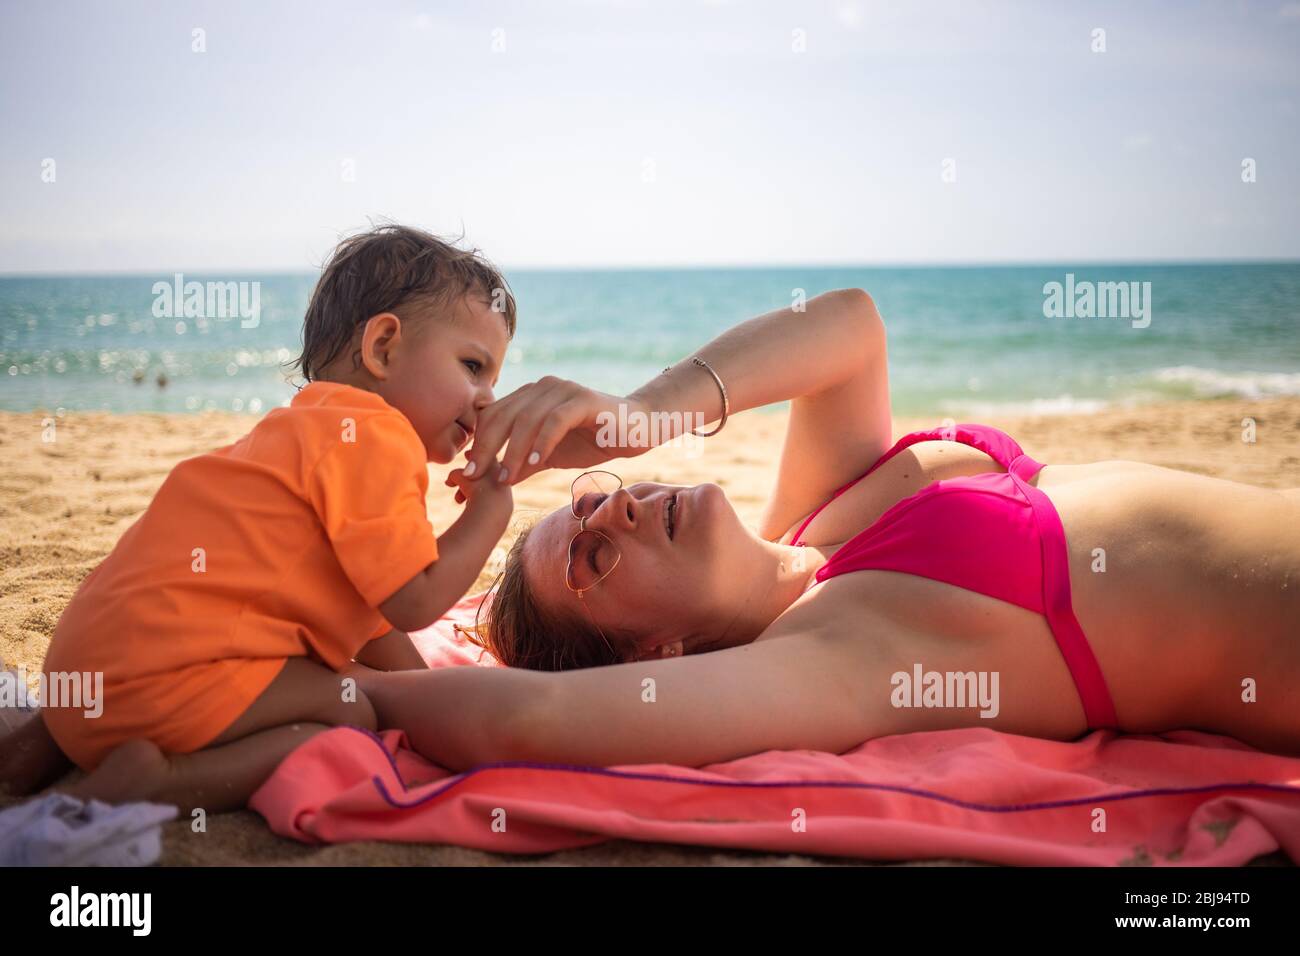 Little cute toddler is playing and pestering a young Caucasian mom who is lying on the sand of a beach. warm sea on a sunny day in the background. Stock Photo